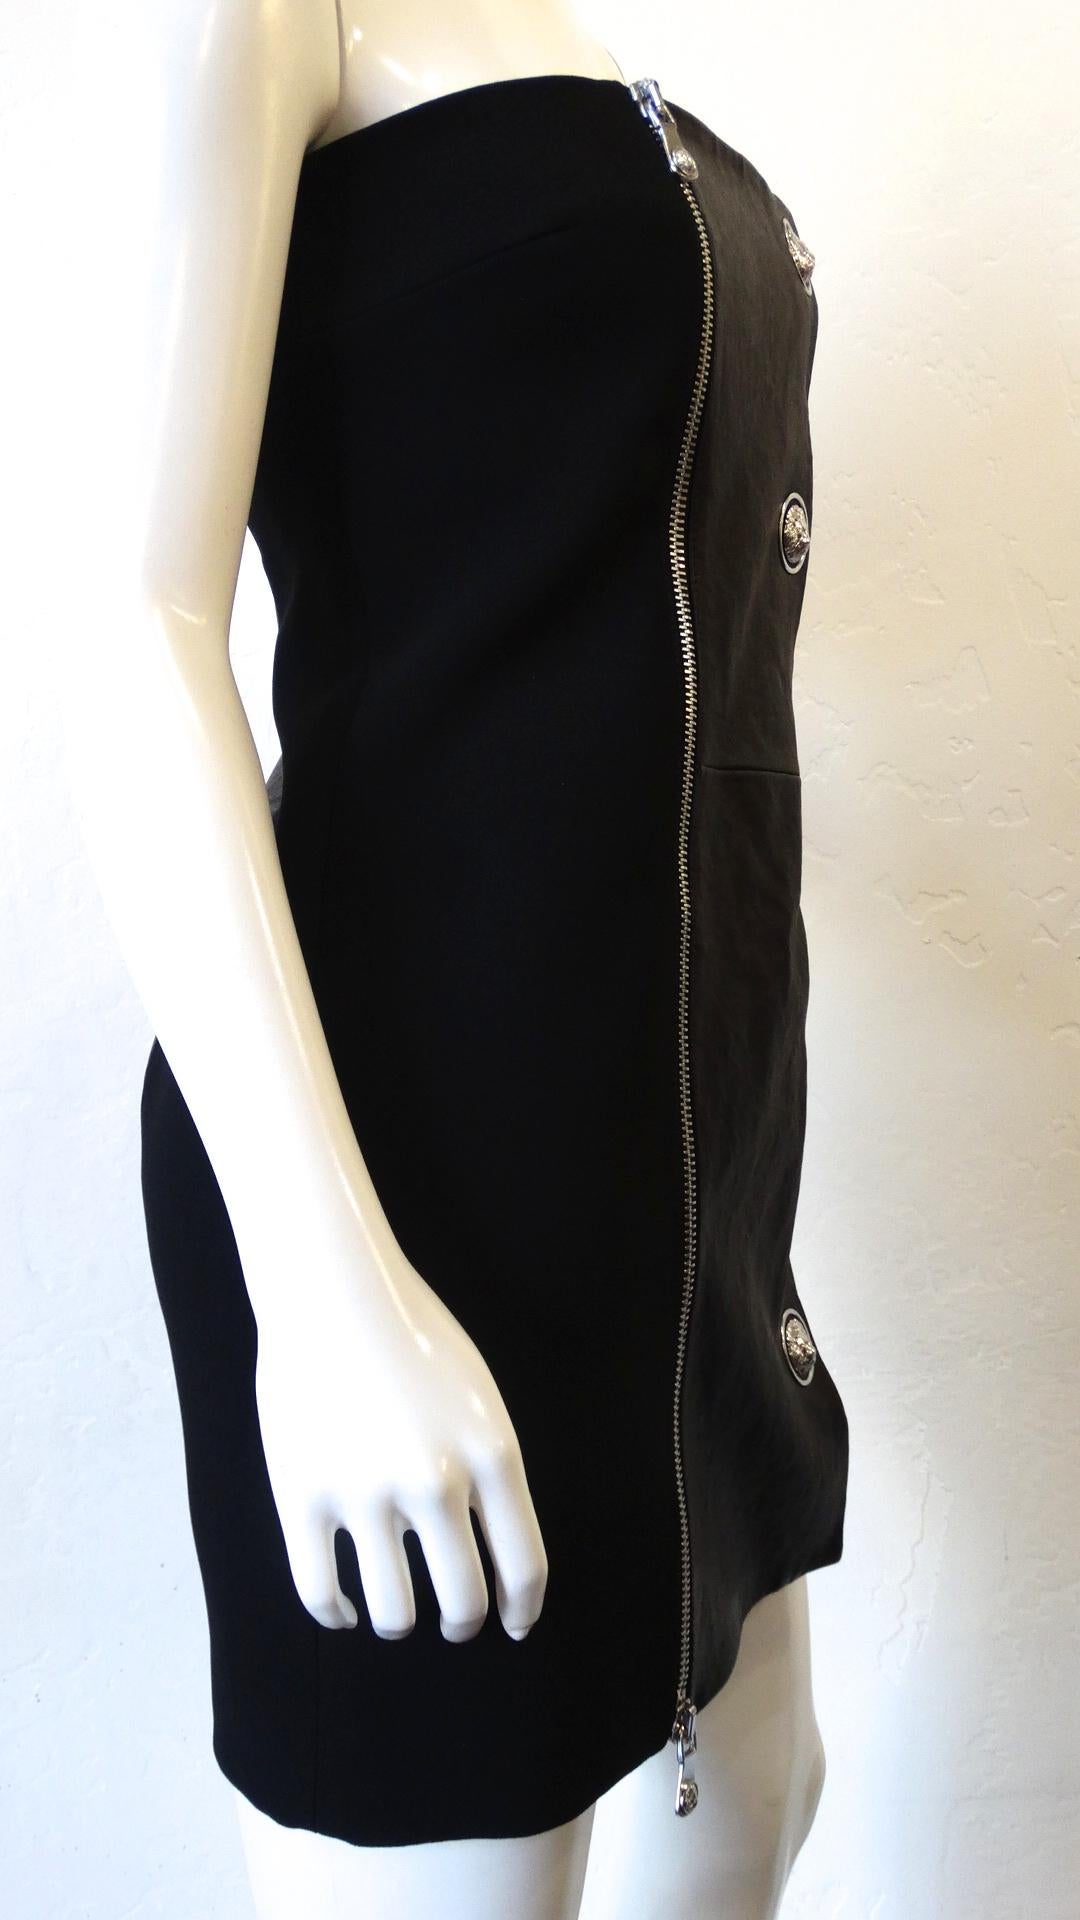 2000s Anthony Vaccarello for Versus Versace Strapless Dress In Excellent Condition For Sale In Scottsdale, AZ